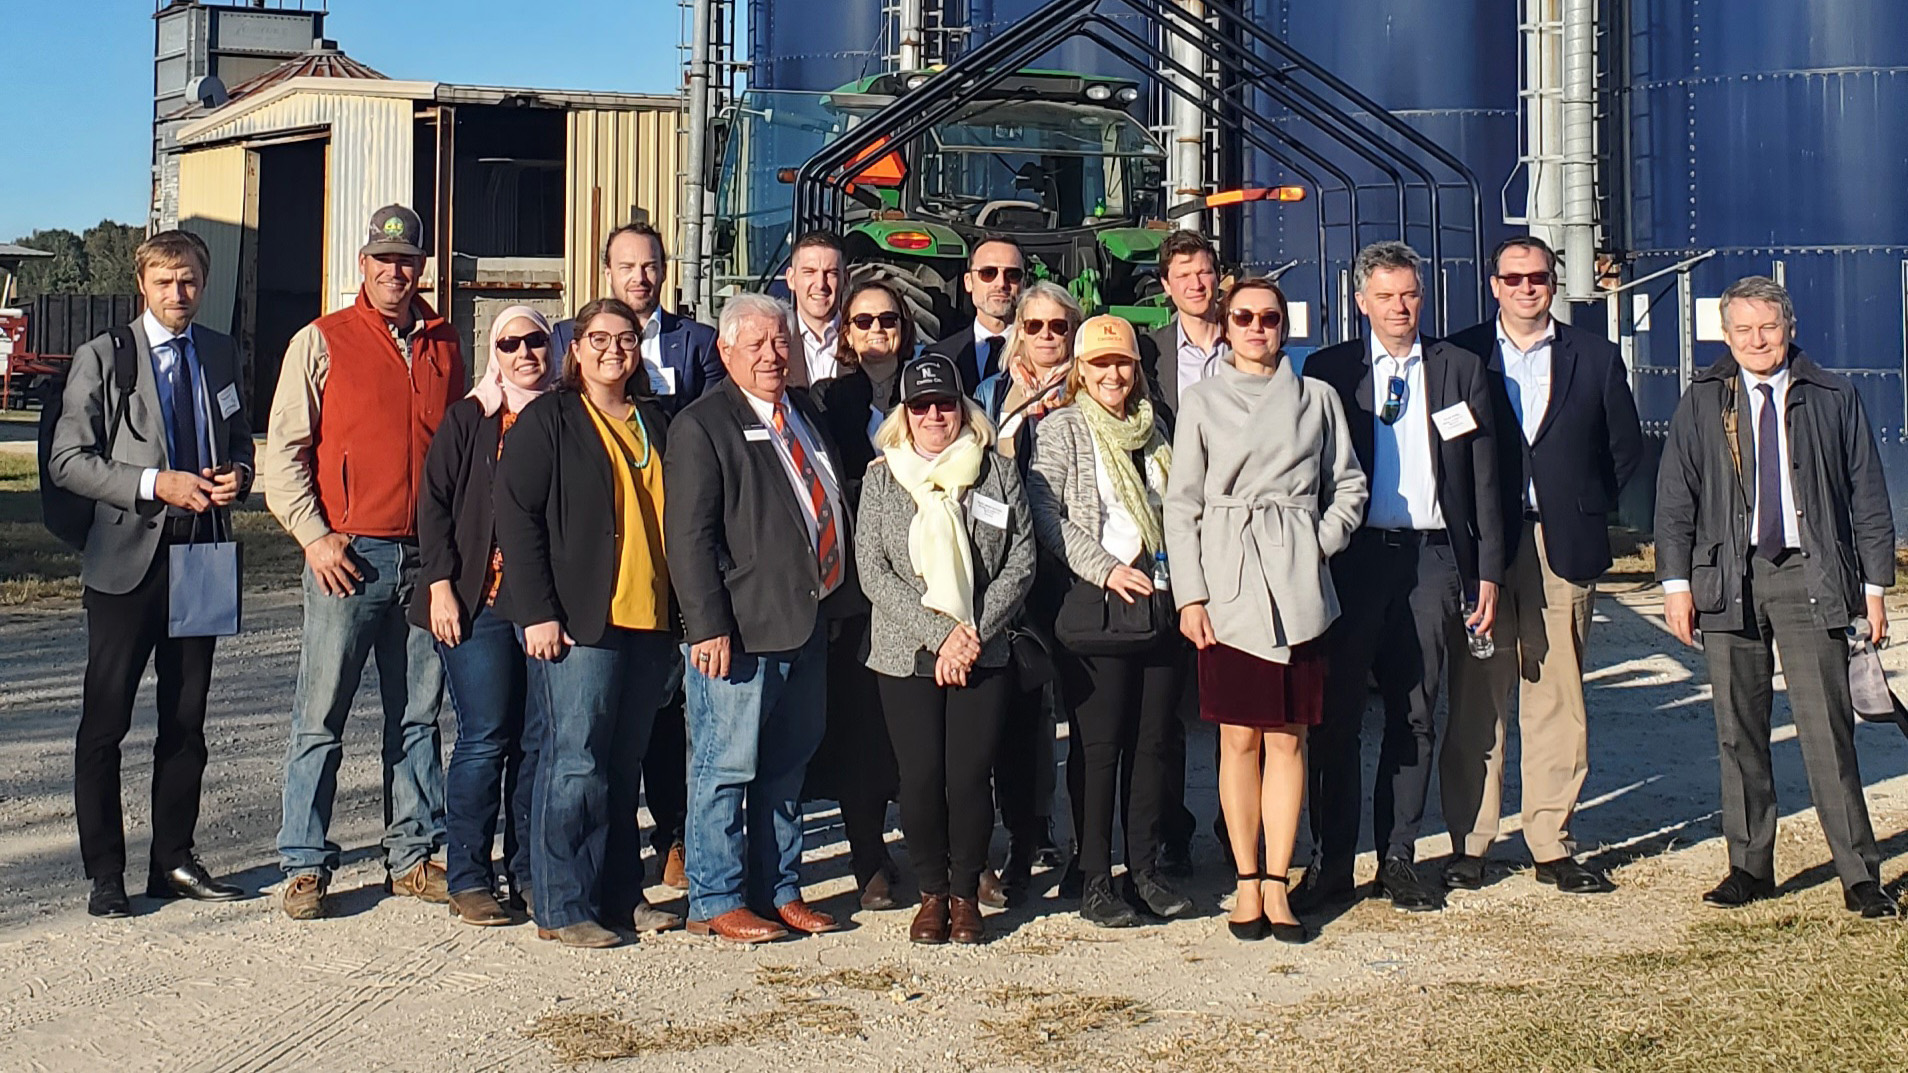 Representatives from 12 foreign embassies pose for a group photo with members of the Auburn University animal science faculty while on a farm tour in mid-October 2022